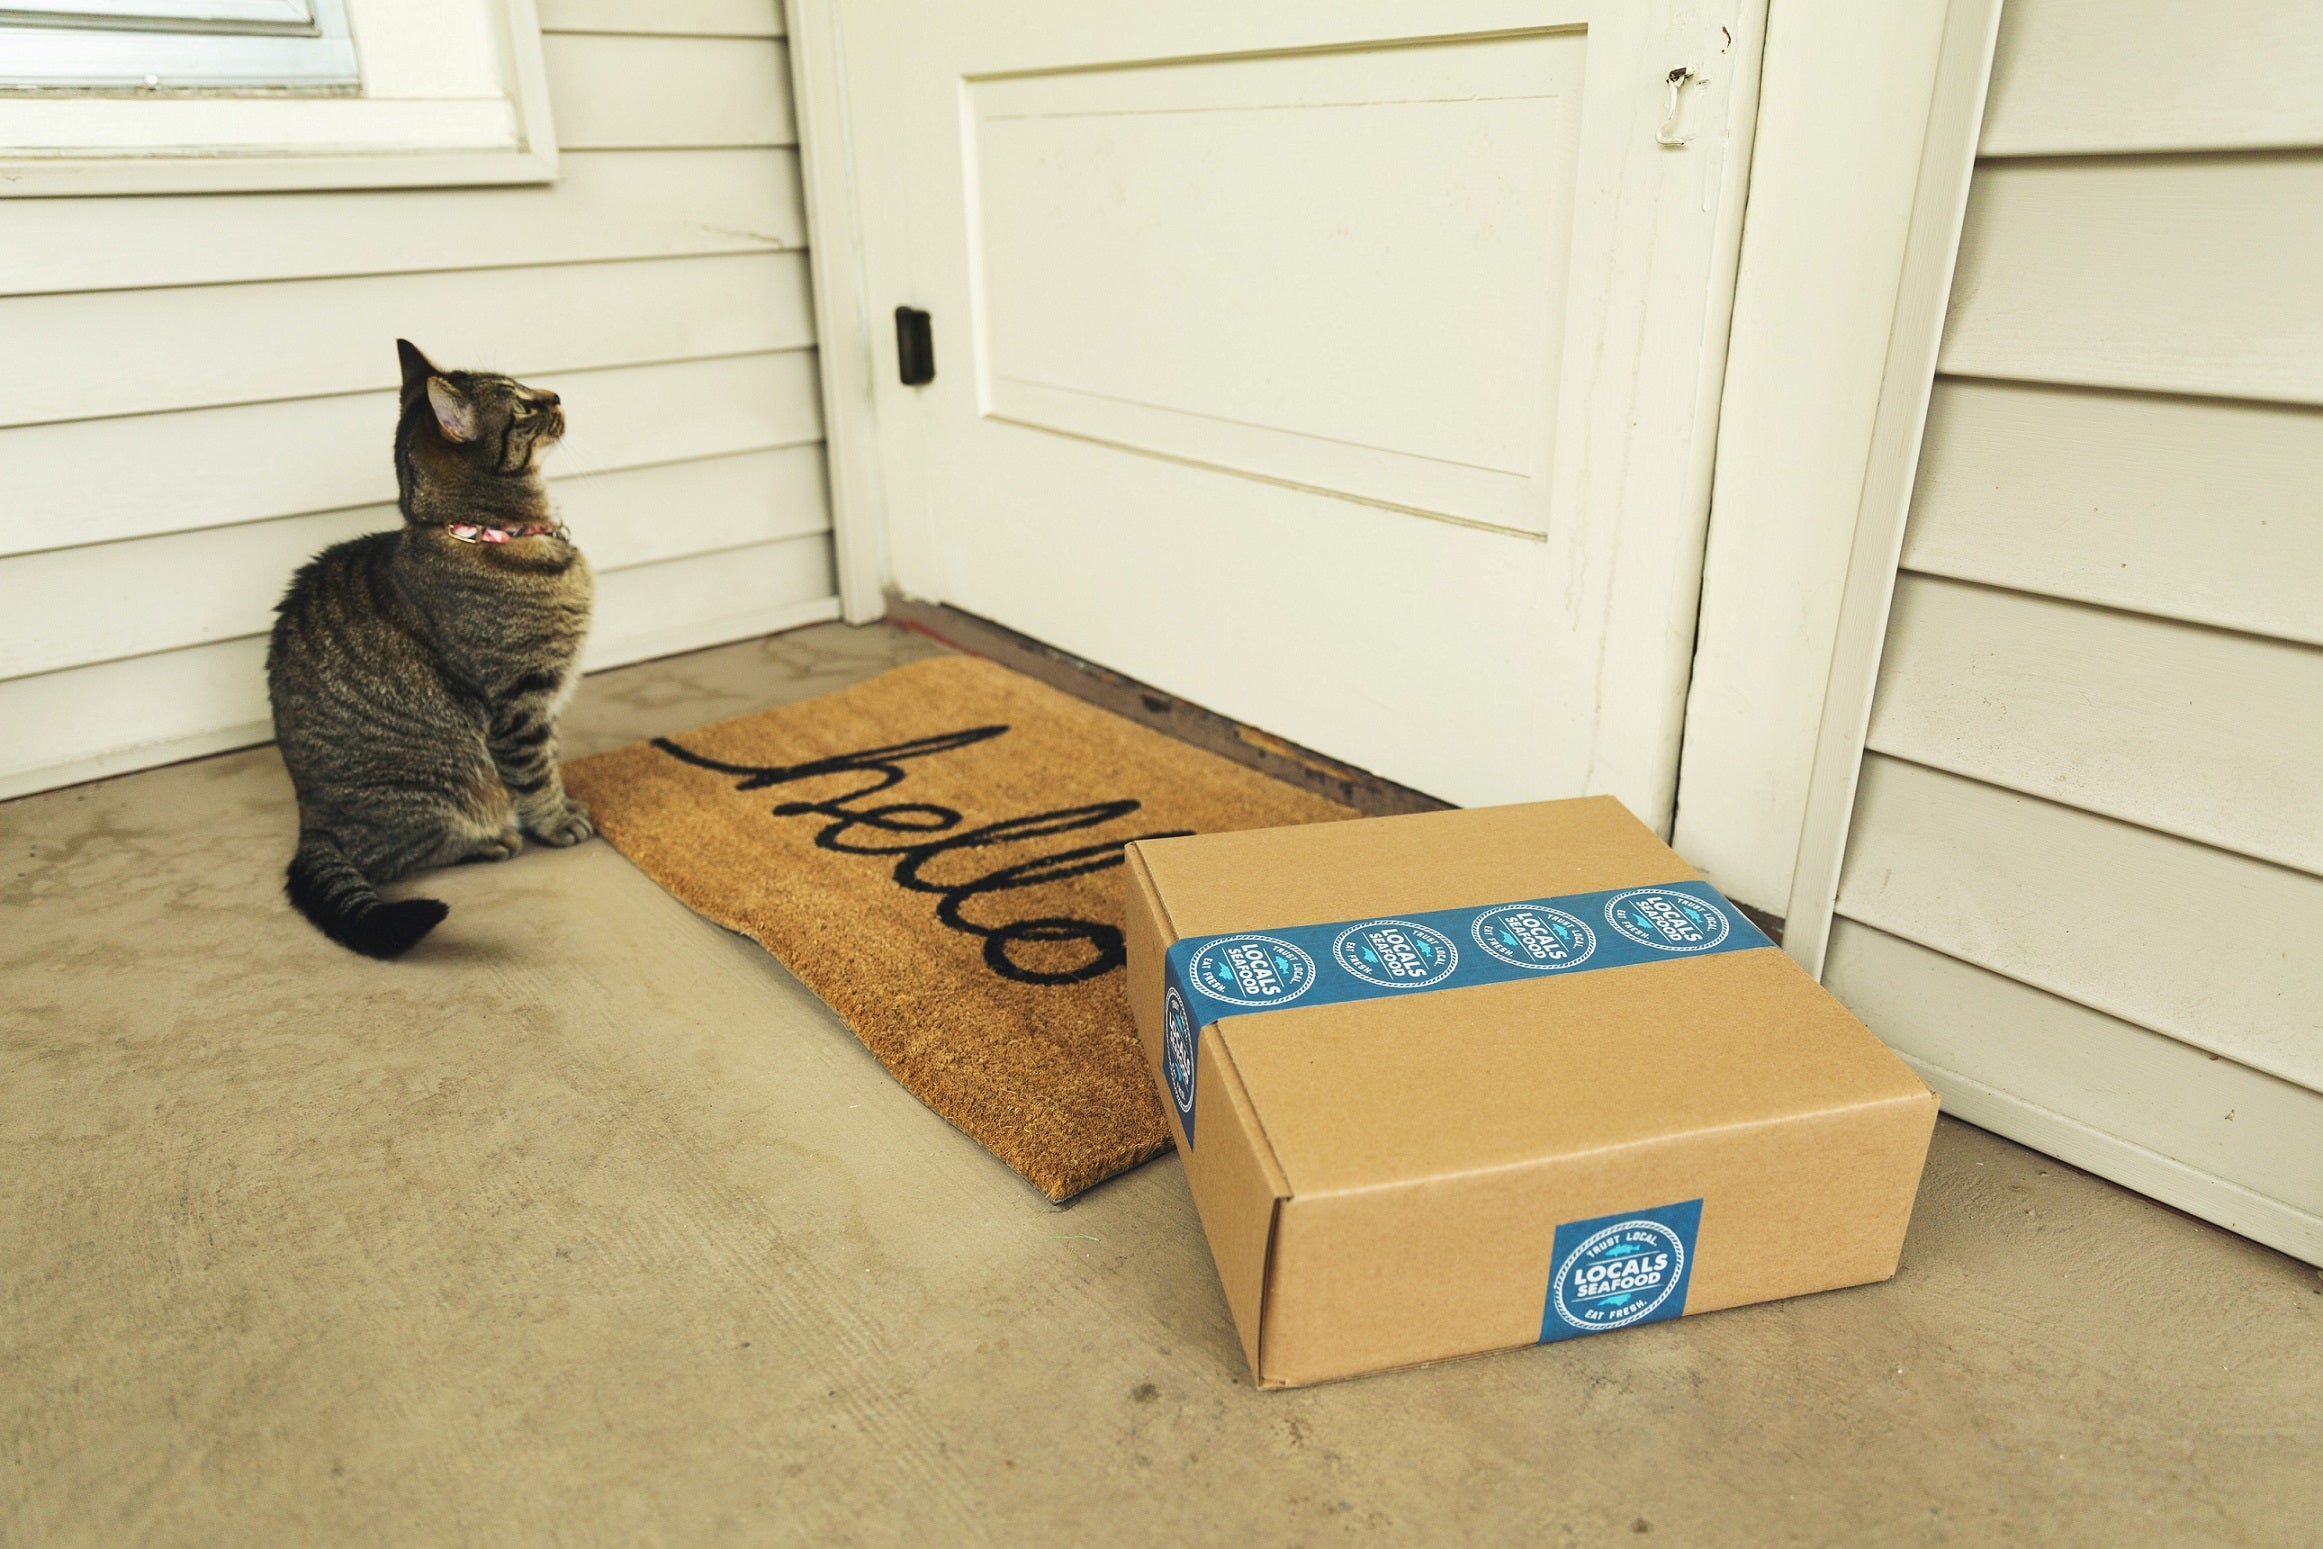 A cat sitting next to a parcel left by the door